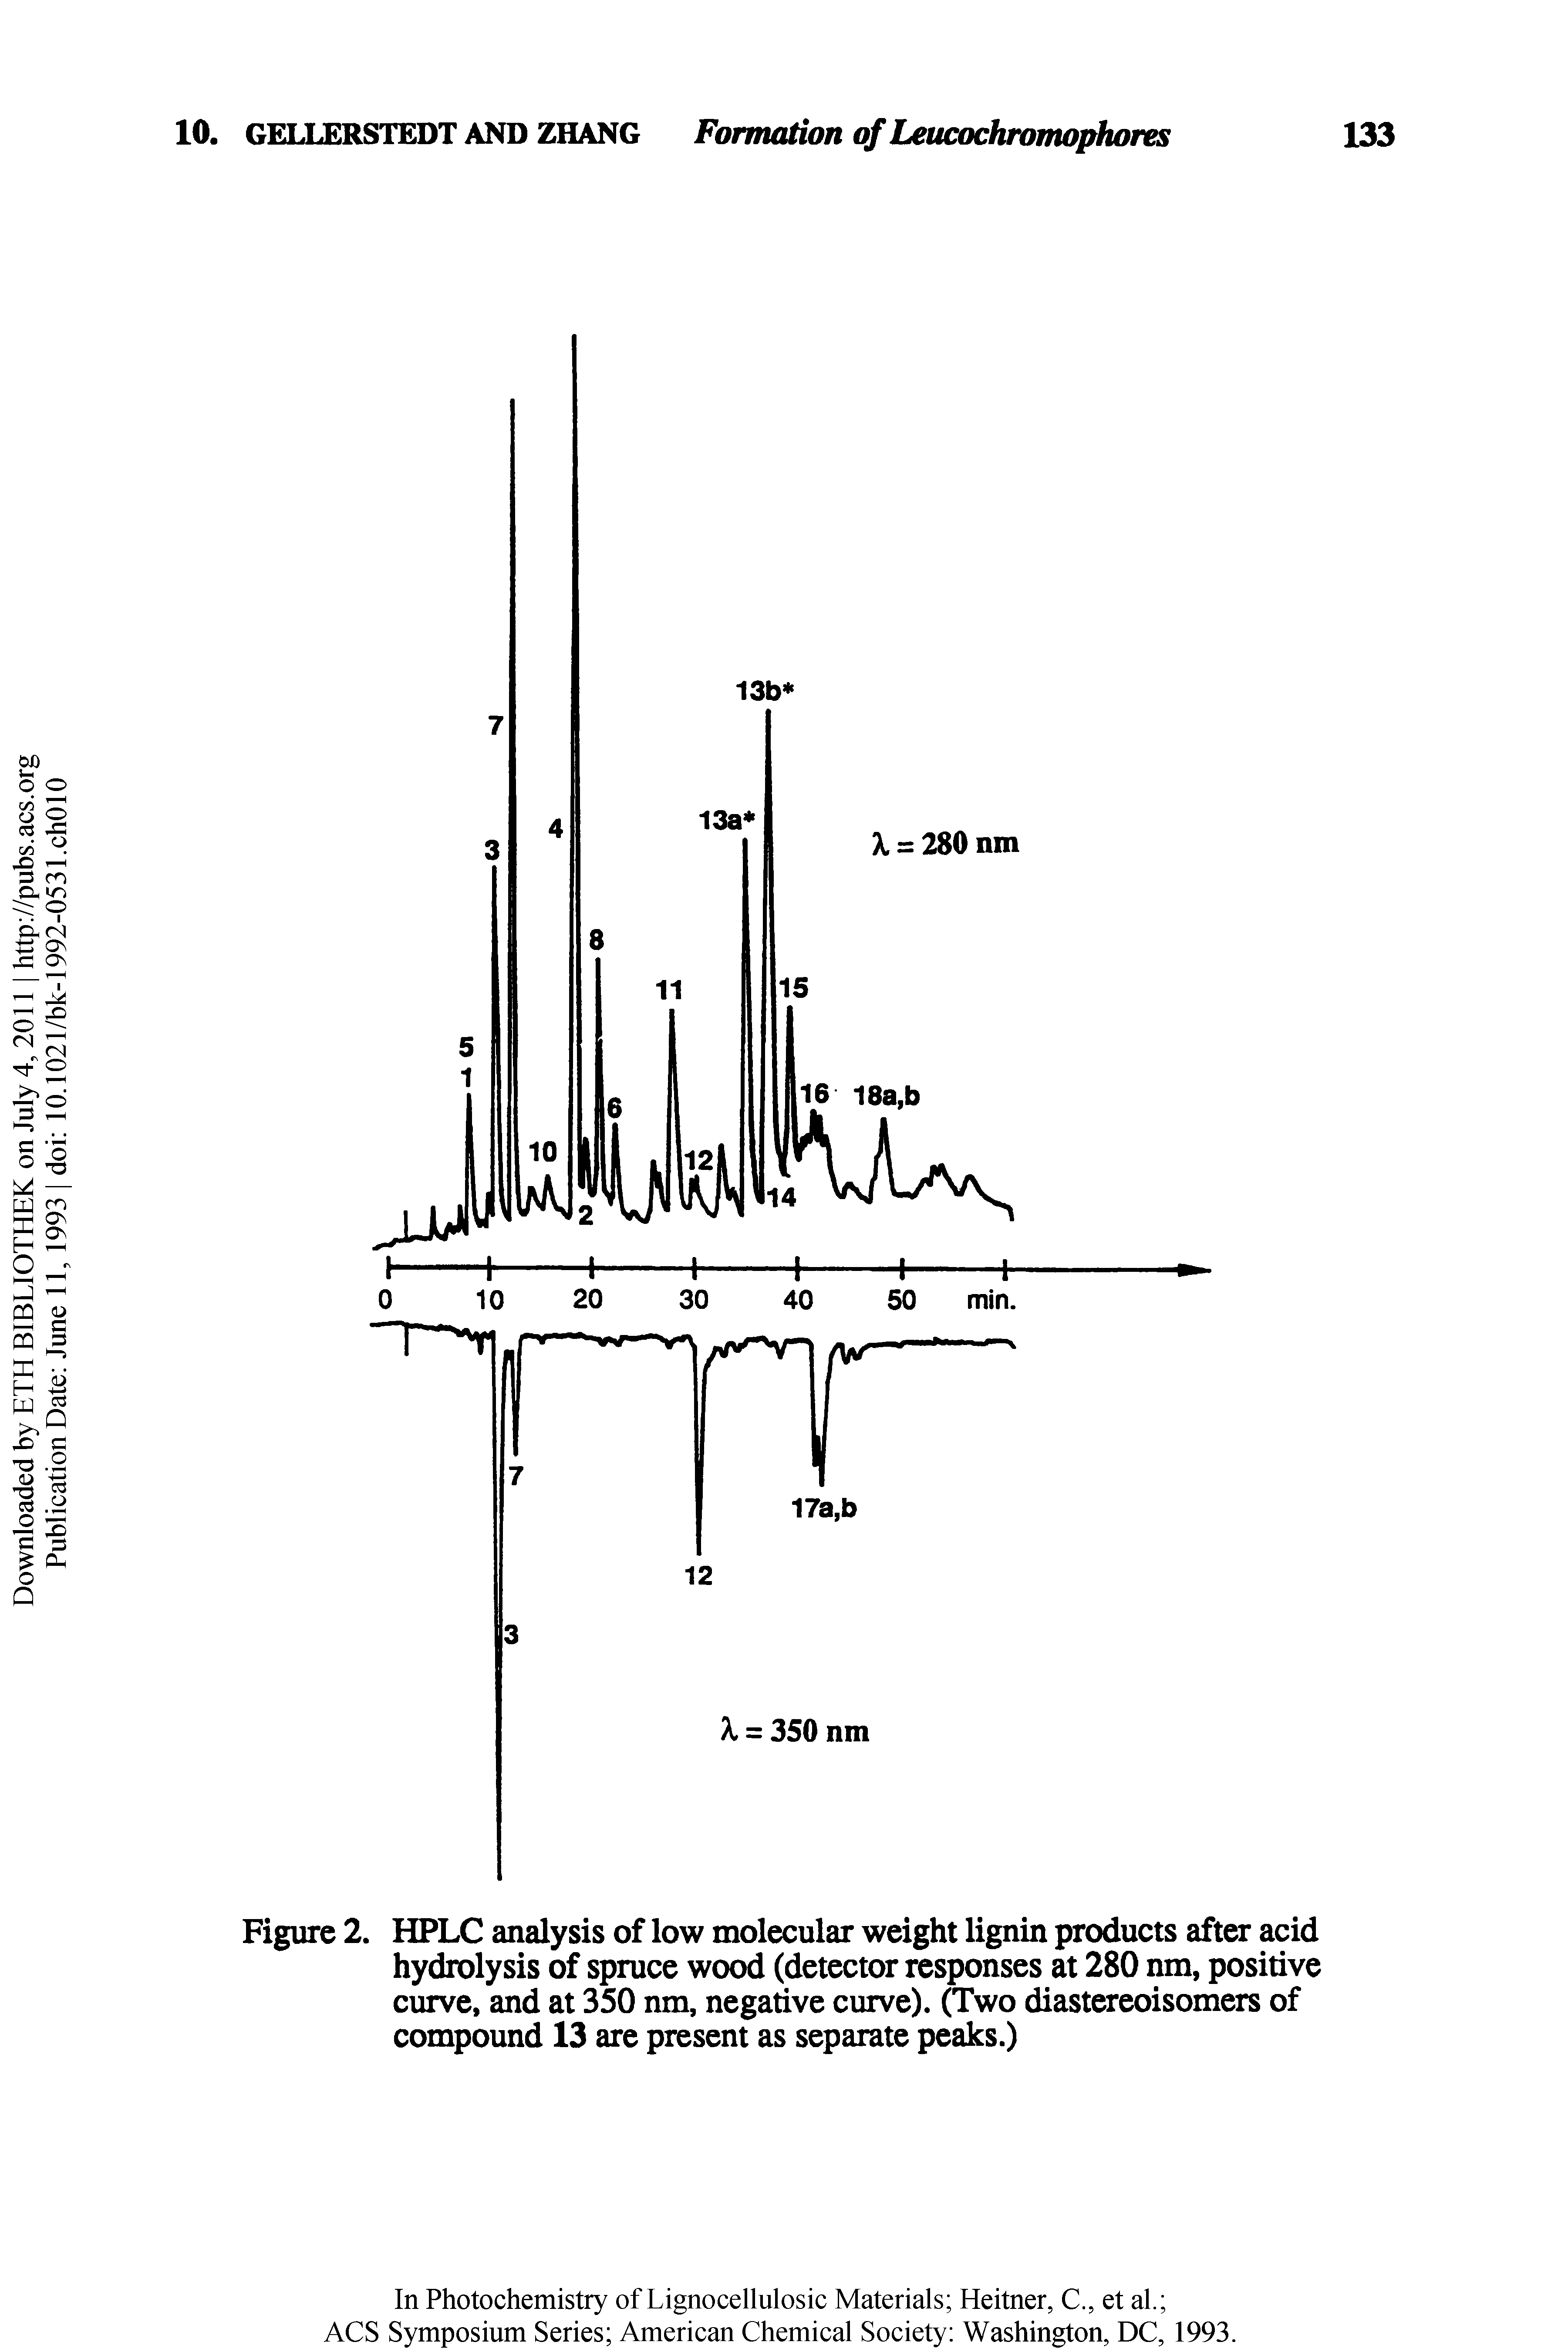 Figure 2. HPLC analysis of low molecular weight lignin products after acid hydrolysis of spruce wood (detector responses at 280 nm, positive curve, and at 350 nm, negative curve). (Two diastereoisomers of compound 13 are present as separate peaks.)...